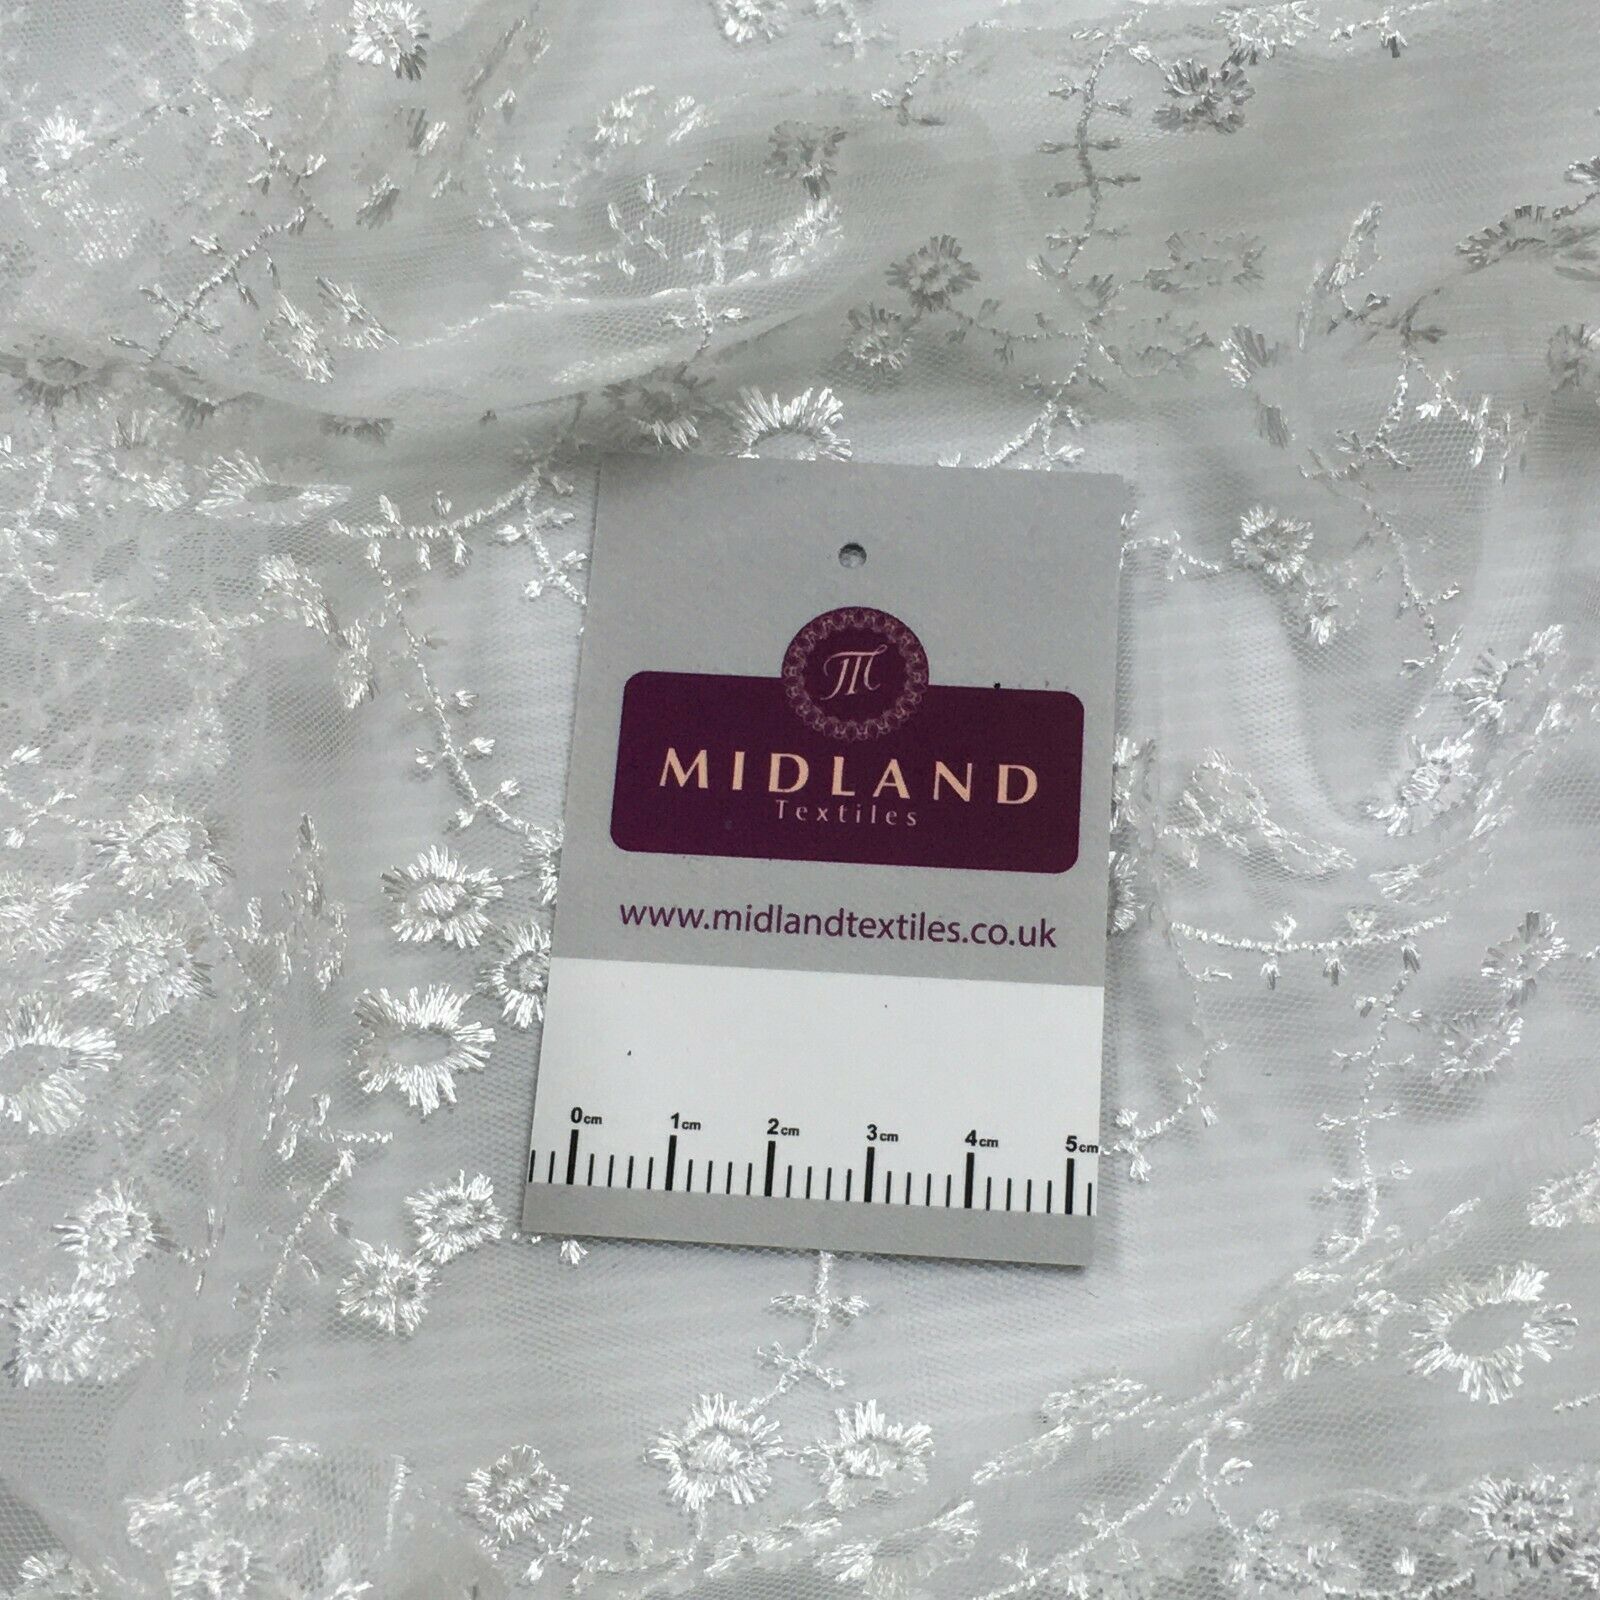 Embroidered Floral Tulle Net wedding dress Fabric MK1428 Mtex